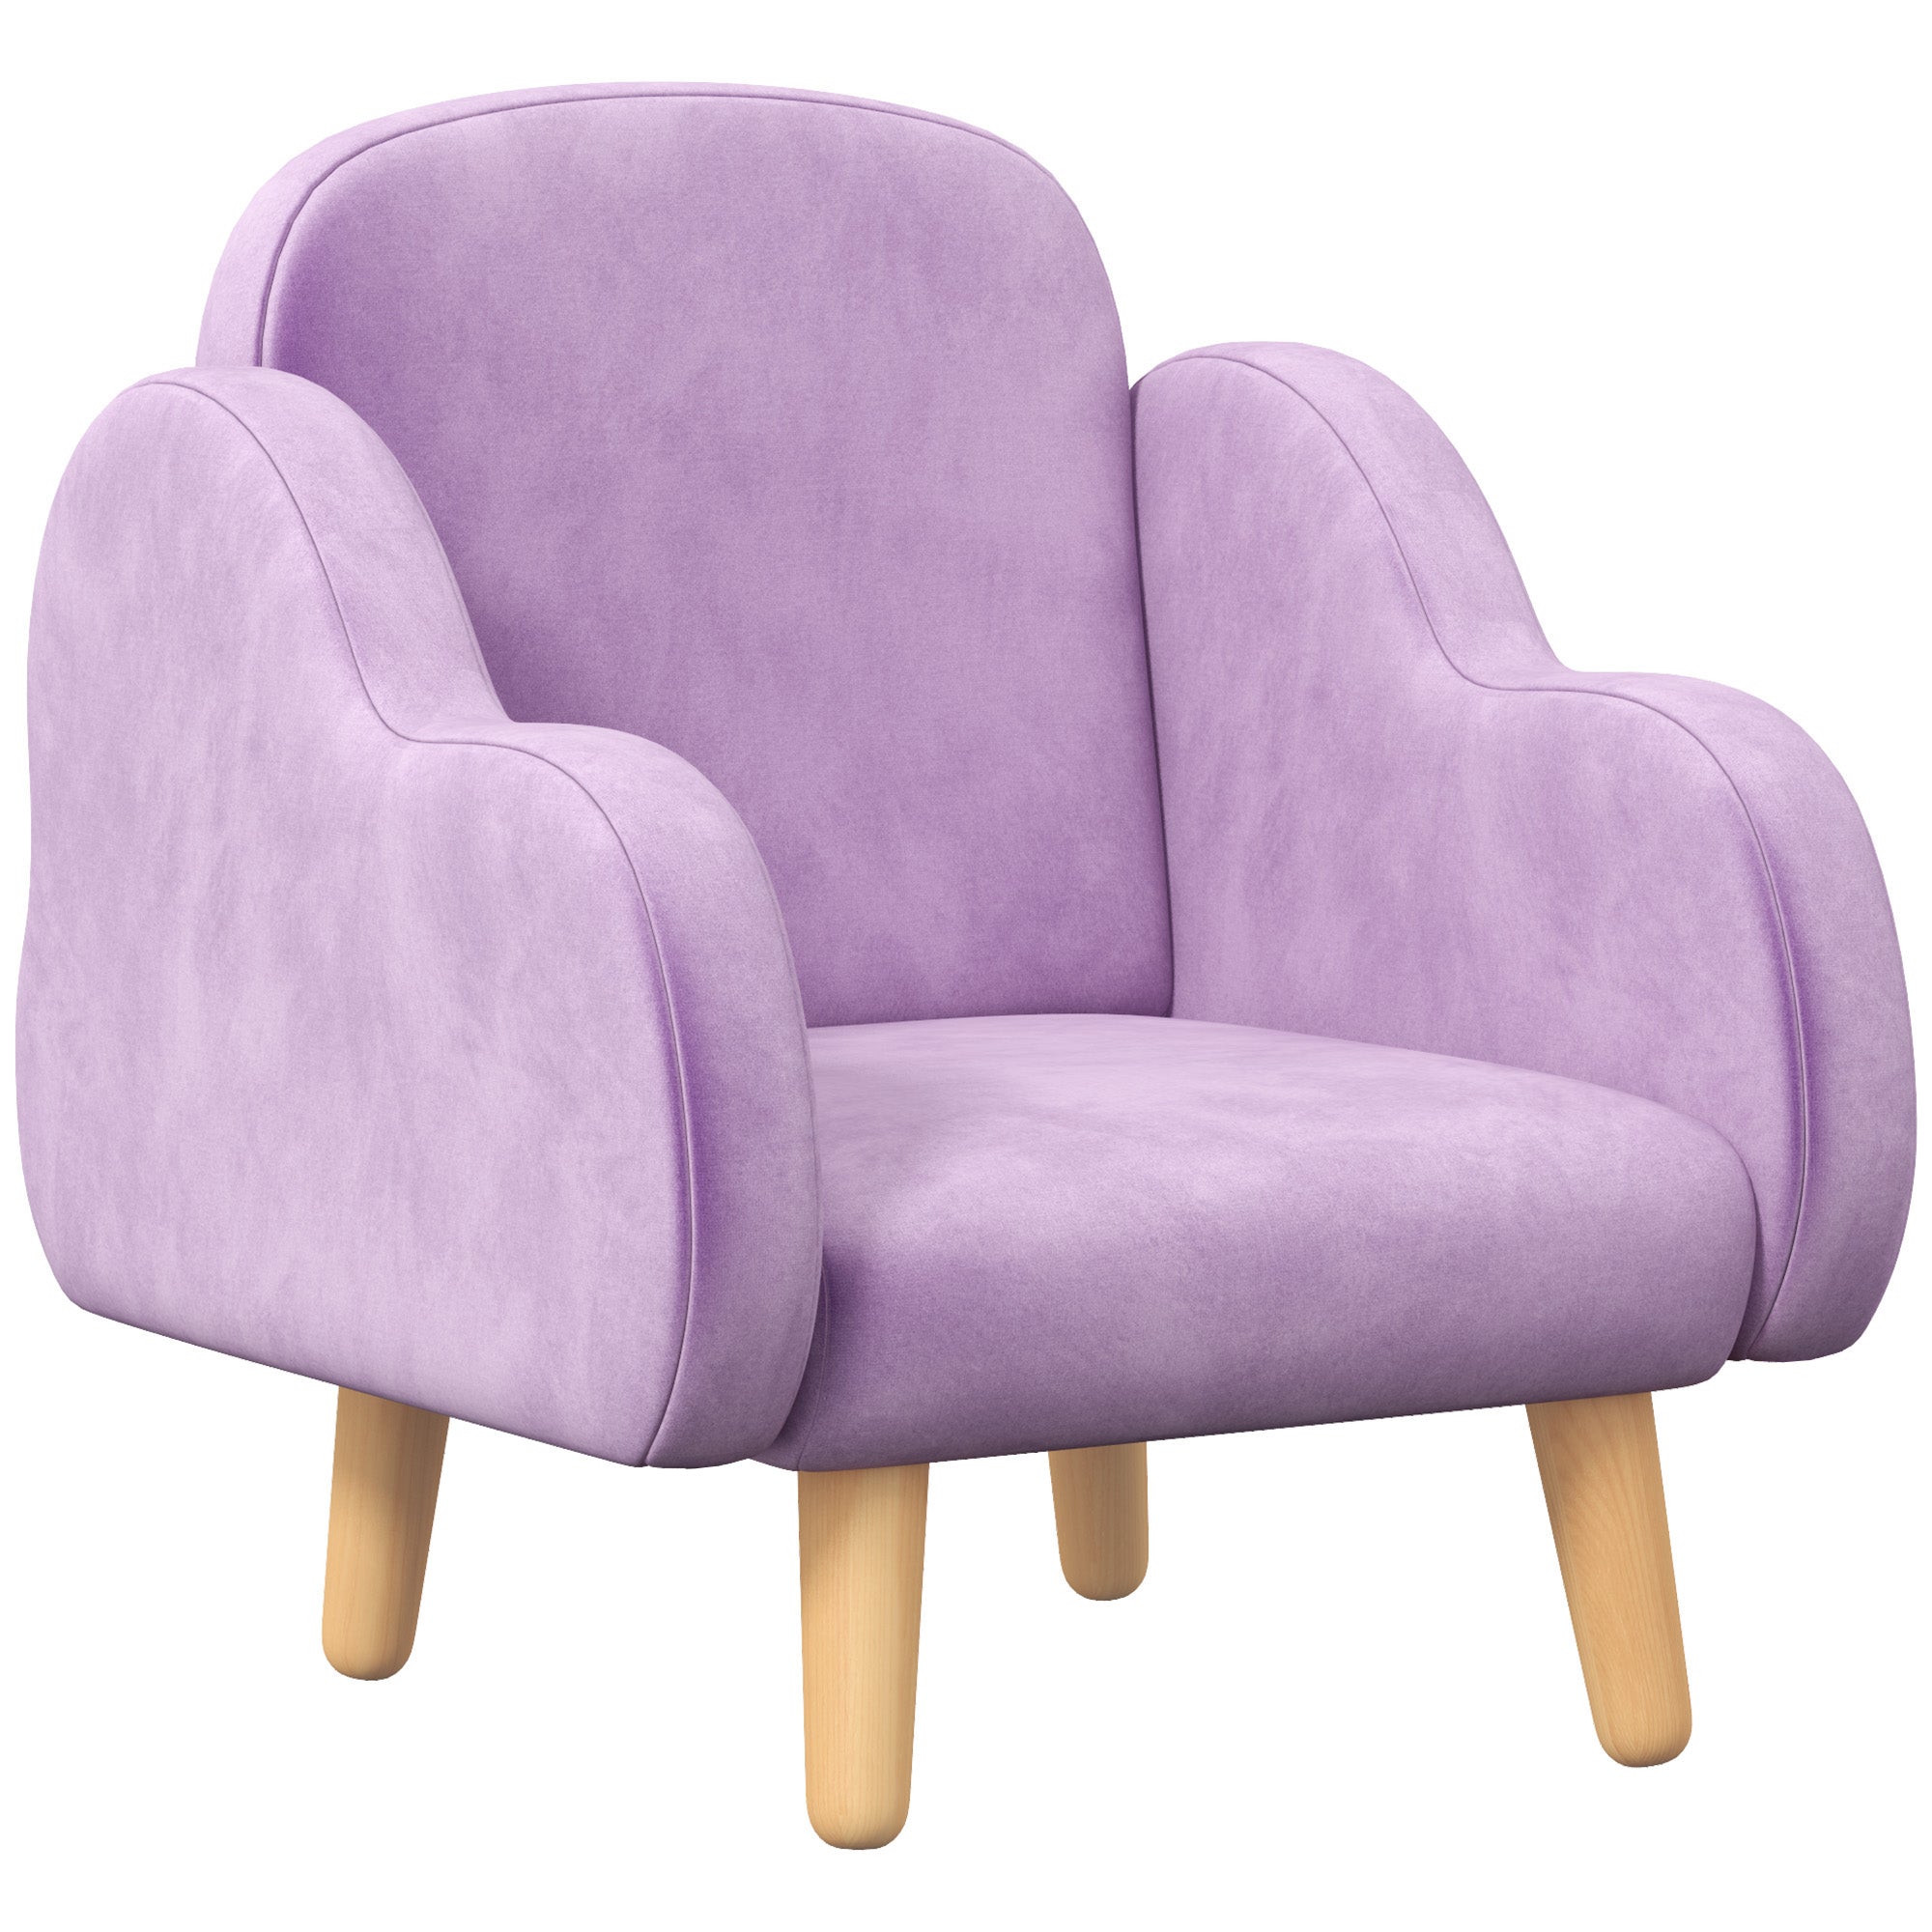 Cloud Shape Toddler Armchair, Ergonomically Designed Kids Chair, Comfy Children Playroom Mini Sofa for Relaxing, for Ages 1.5-5 Years - Purple-0